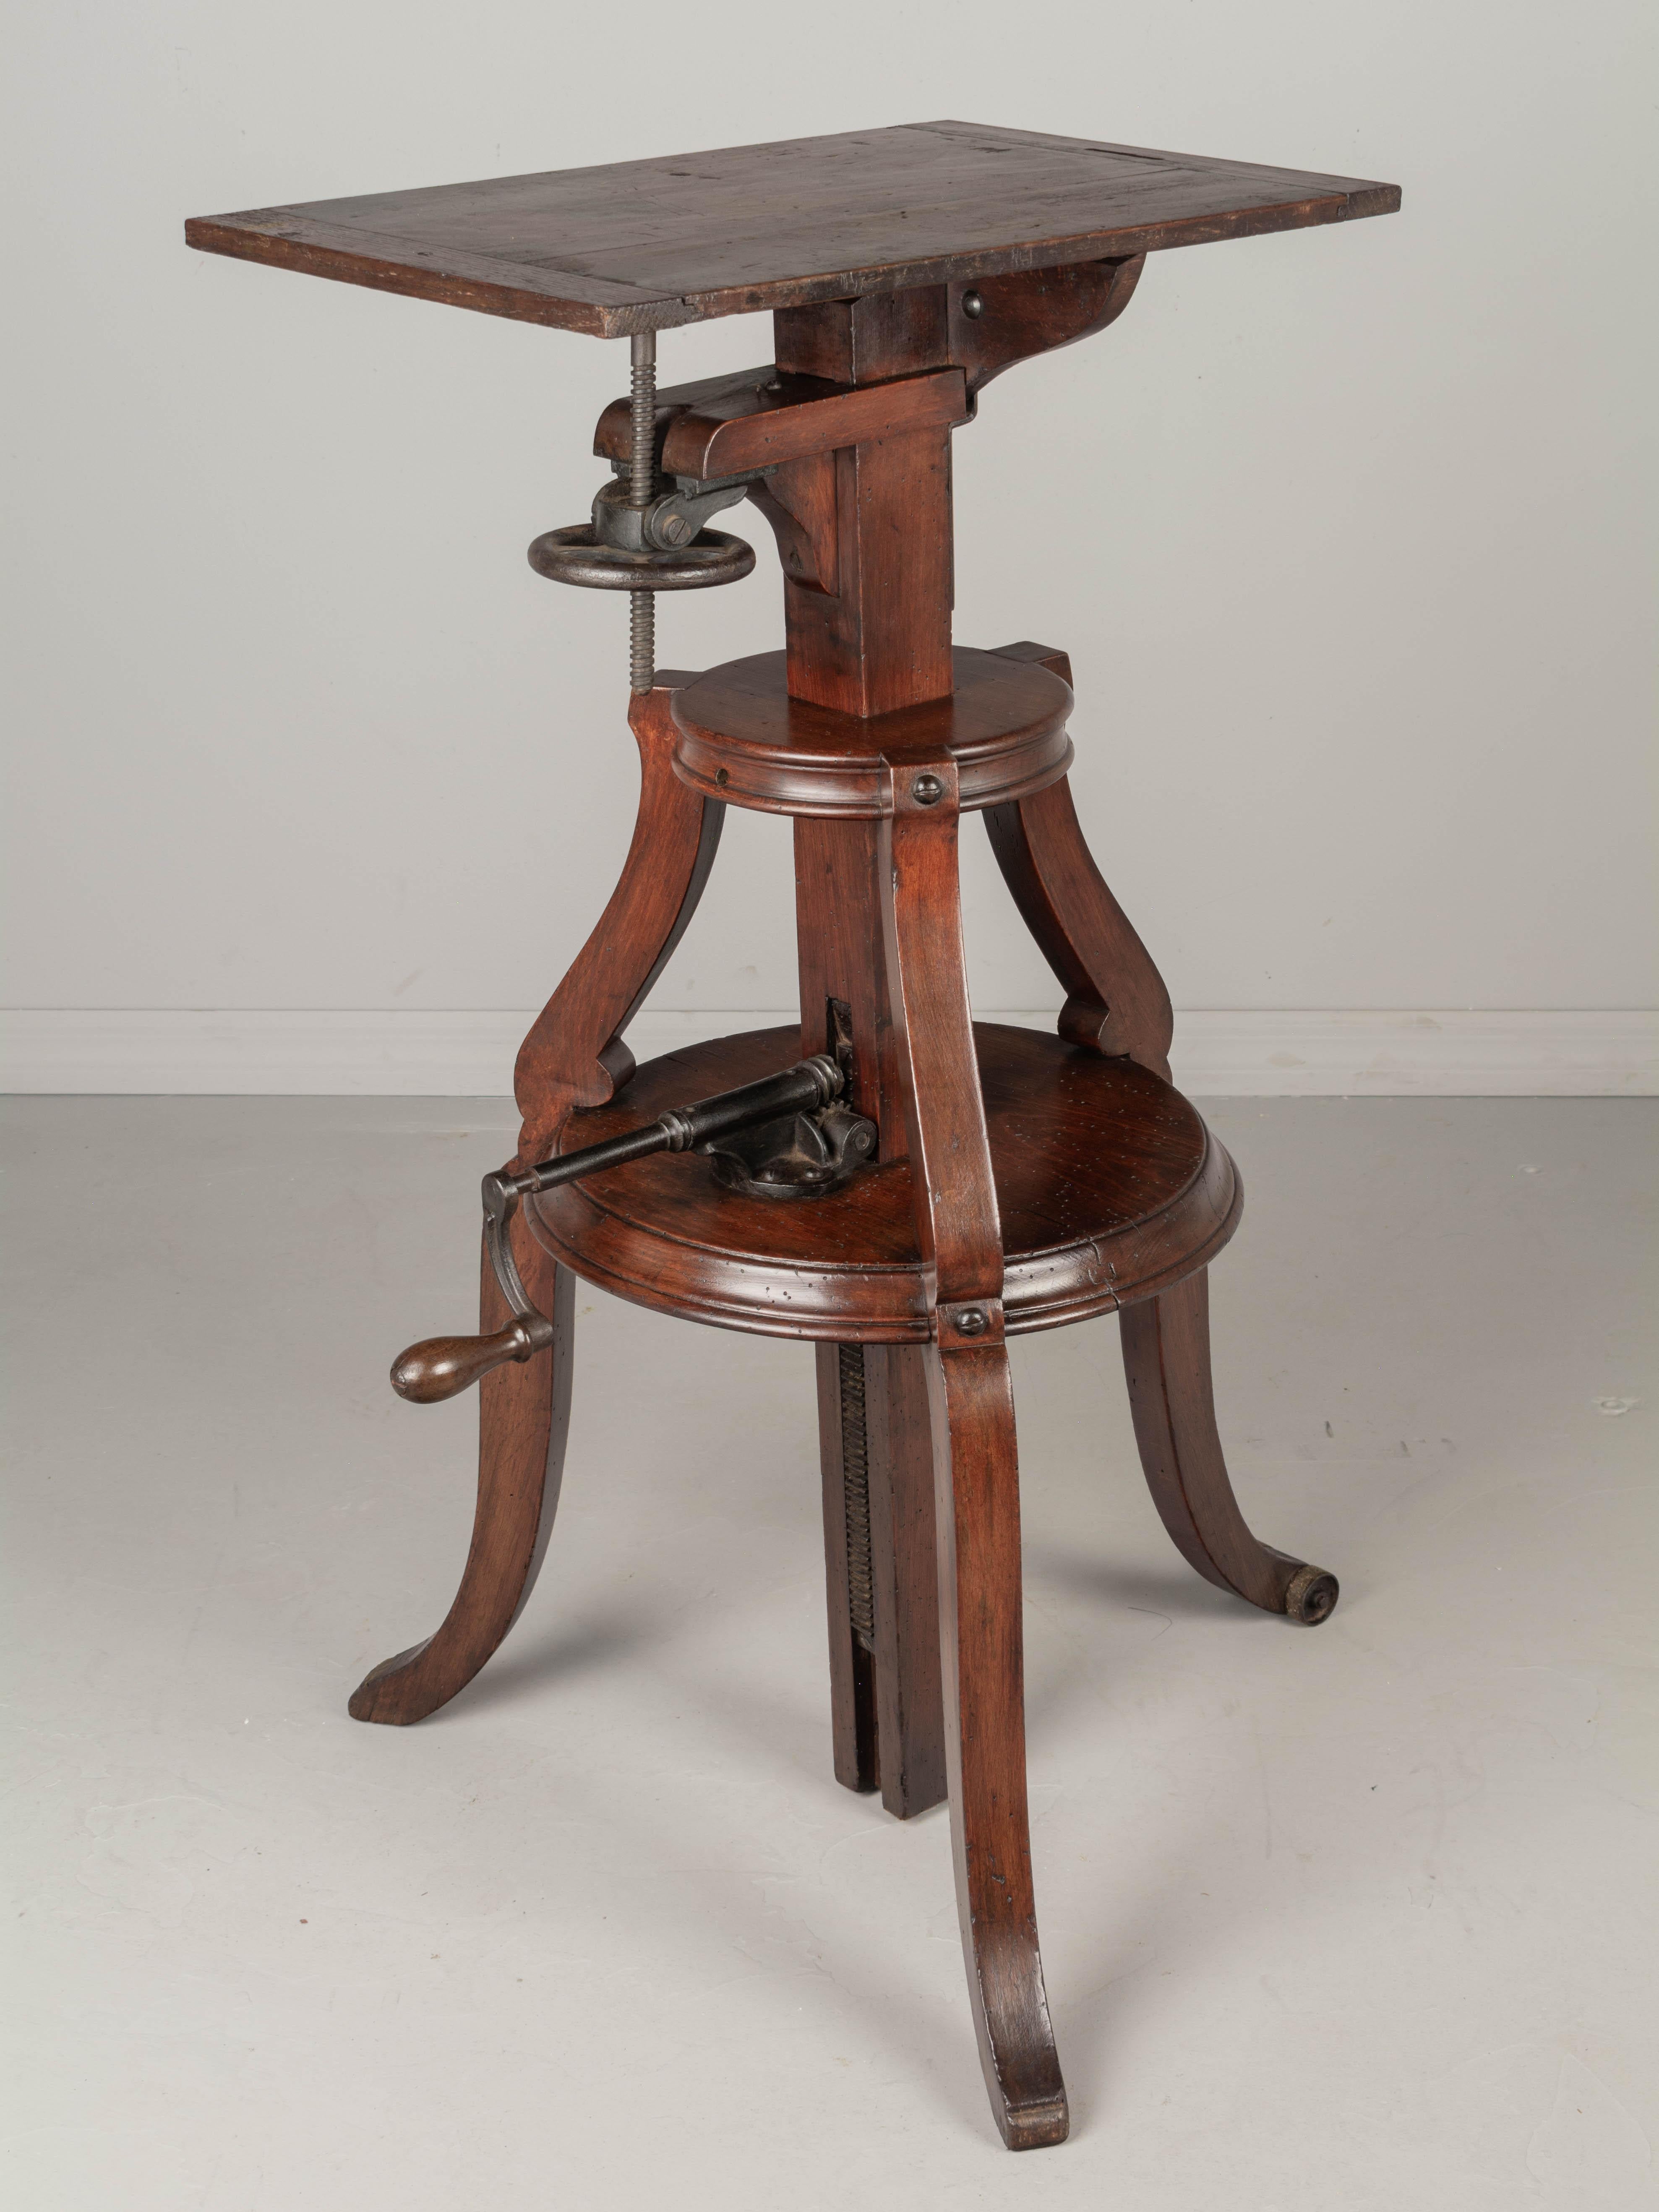 A 19th Century French adjustable sculptor's stand made of solid beechwood with dark finish and waxed patina. Rectangular top and sturdy tiered triform structure with splayed legs. One leg with roller wheel, so this heavy stand may be easily moved.